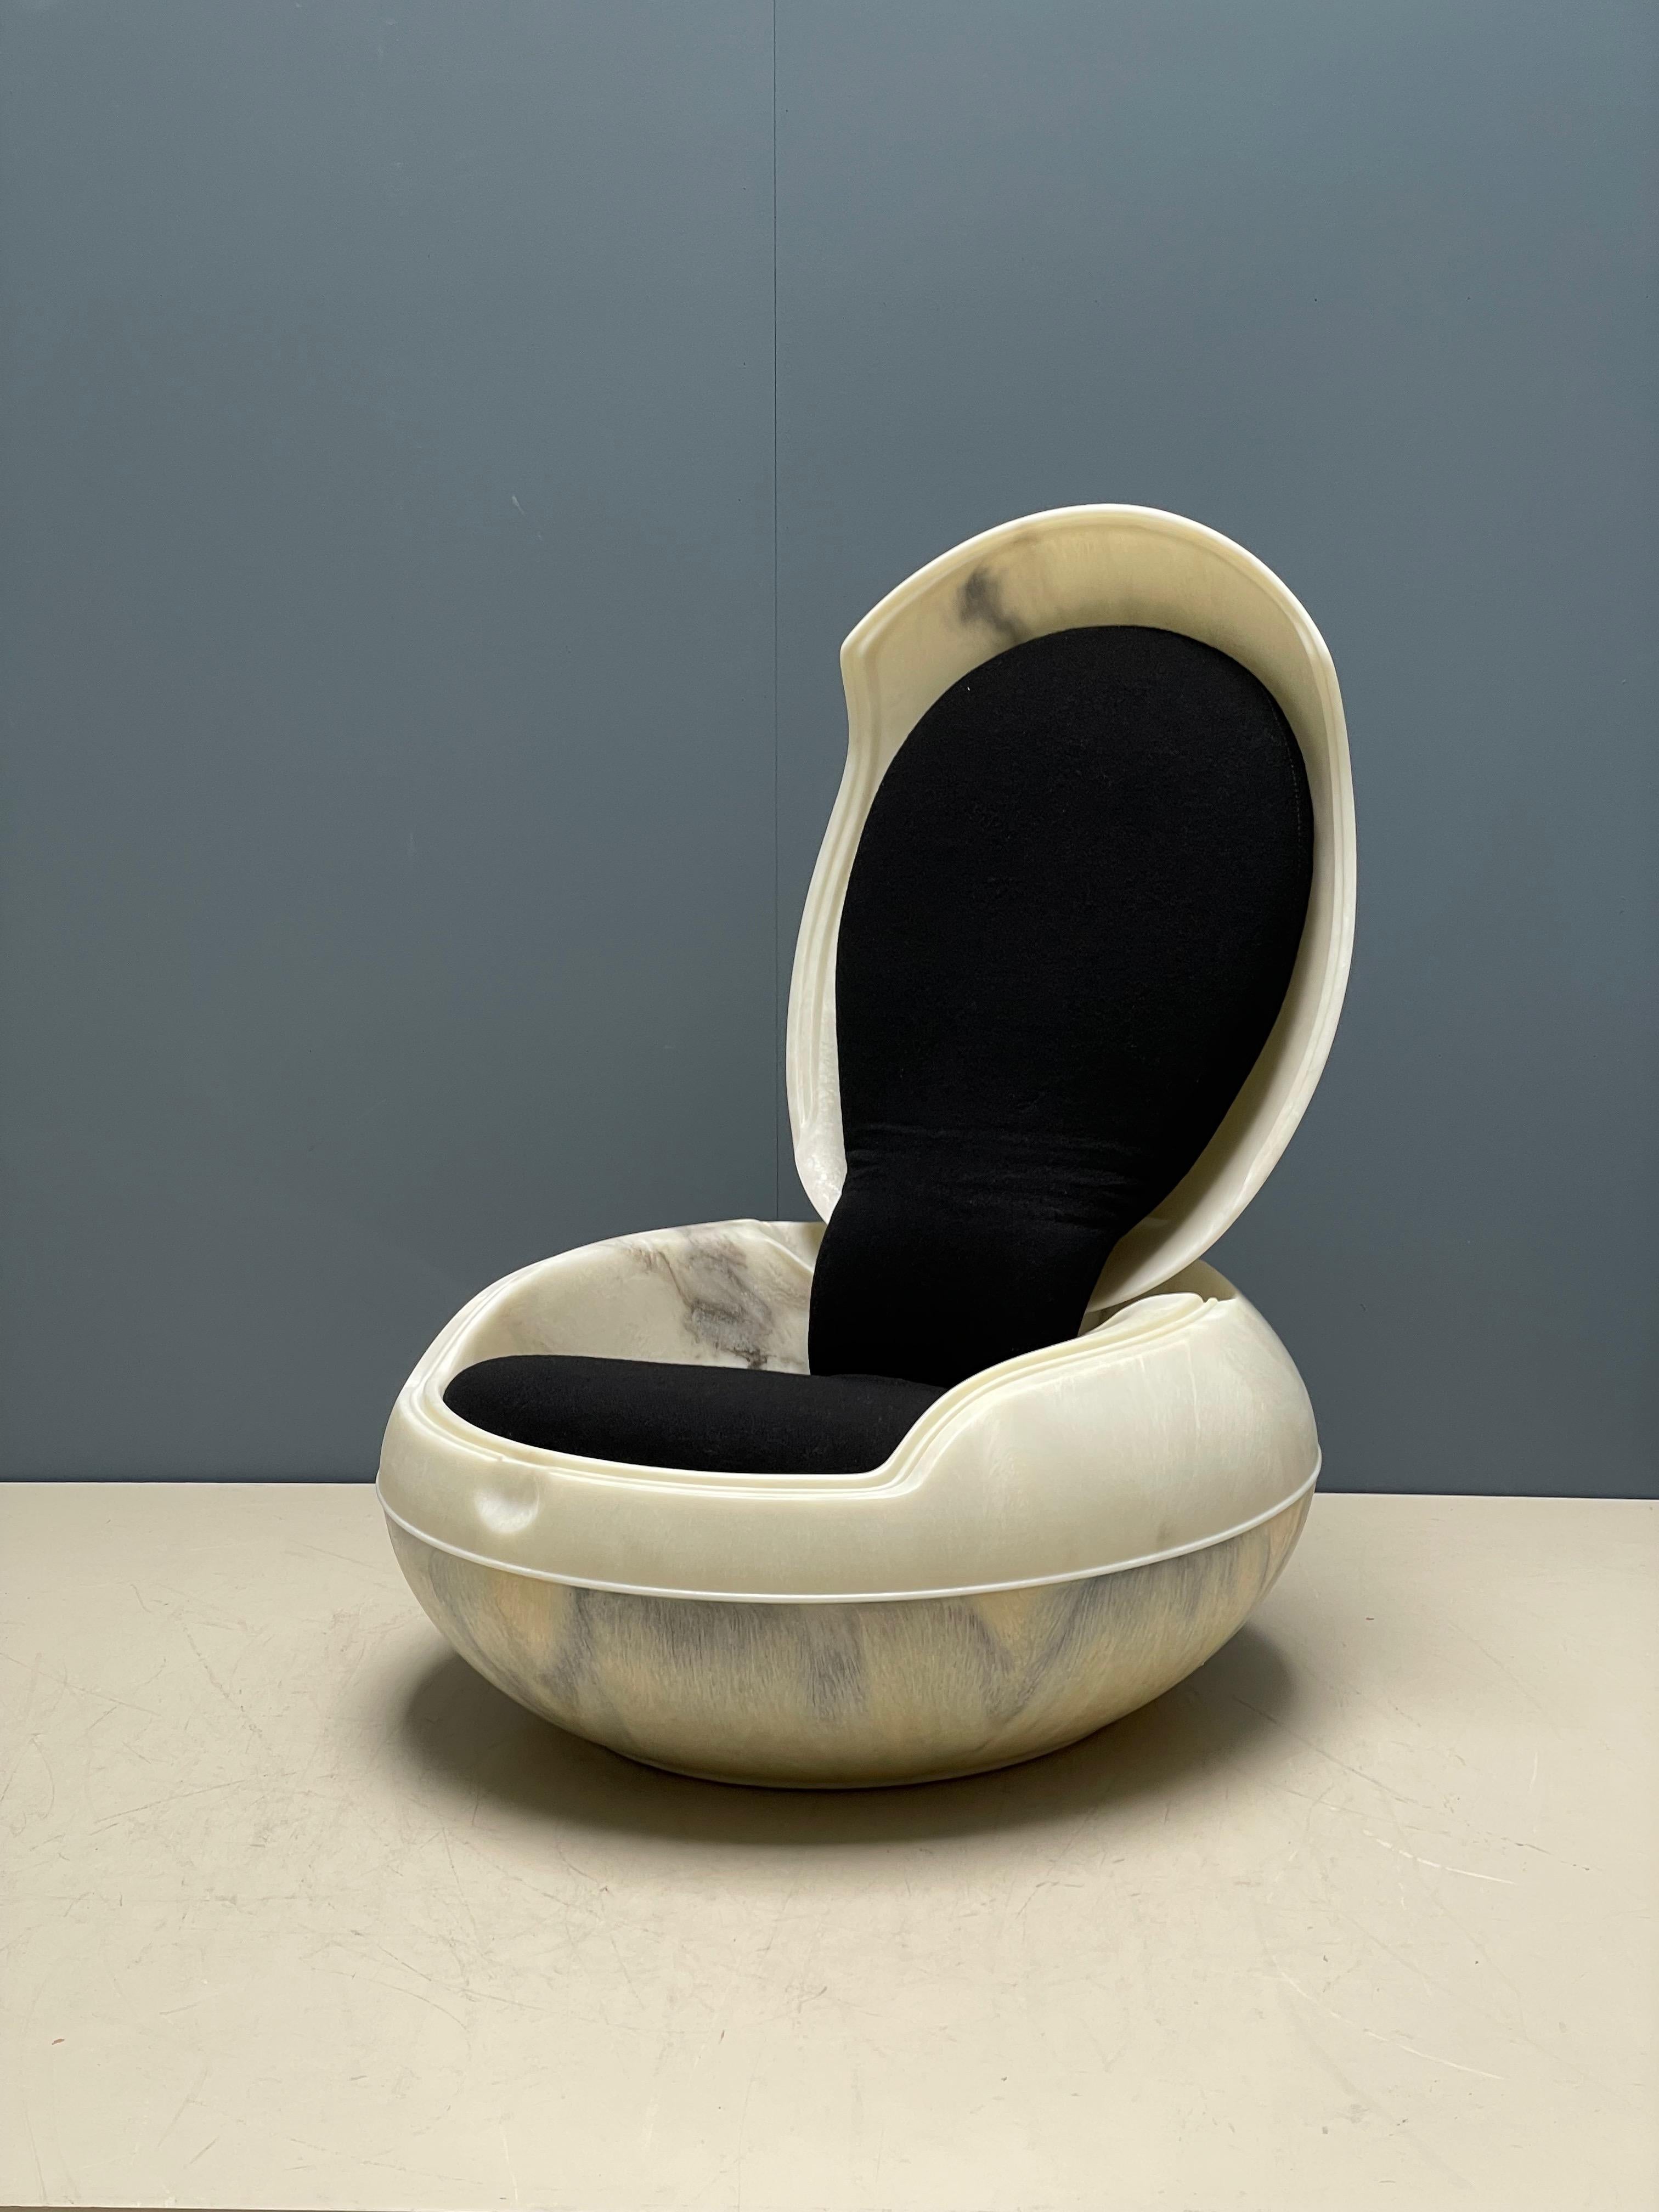 Iconic chair by Peter Ghyczy in 1968. One of his most know designs. This chair is presented in many musea worldwide. 
Caution! Many fake and copies are available on the market. GHYCZY is the only official licensed producer en seller. When in doubt